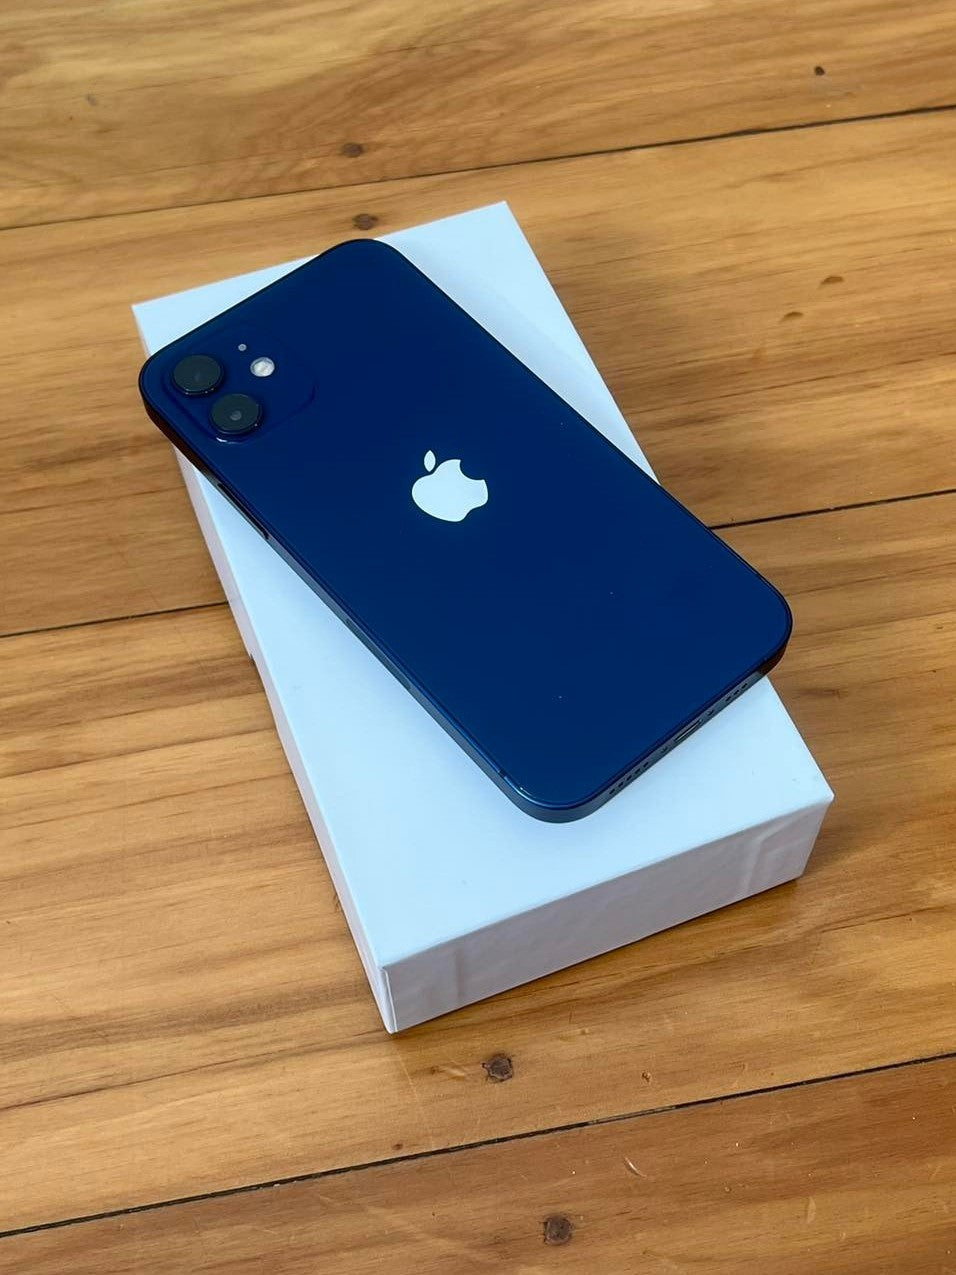 Apple iPhone 12 128GB Blue 5G - New Battery, Case, Glass Screen Protector & Shipping (Excellent)